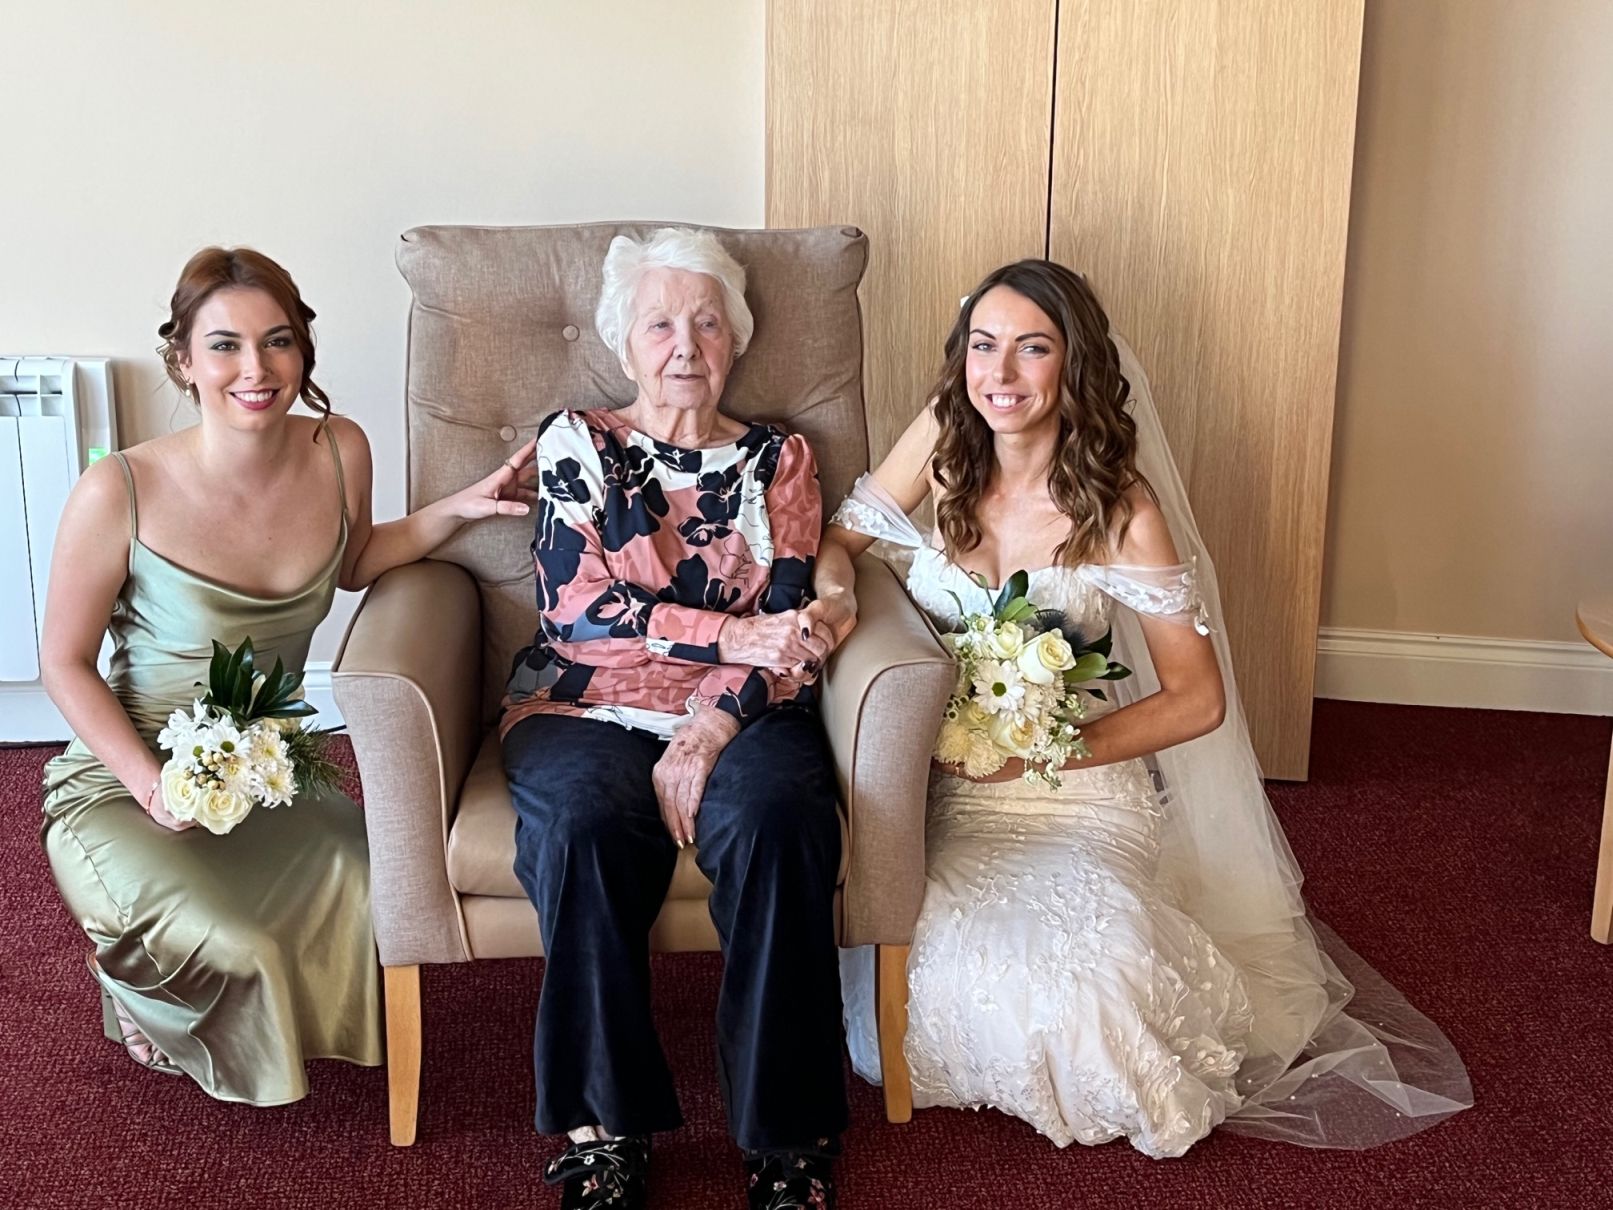 Grandma And Boy - Dementia care home in Newcastle helps grandmother join granddaughter's  wedding celebrations | ITV News Tyne Tees